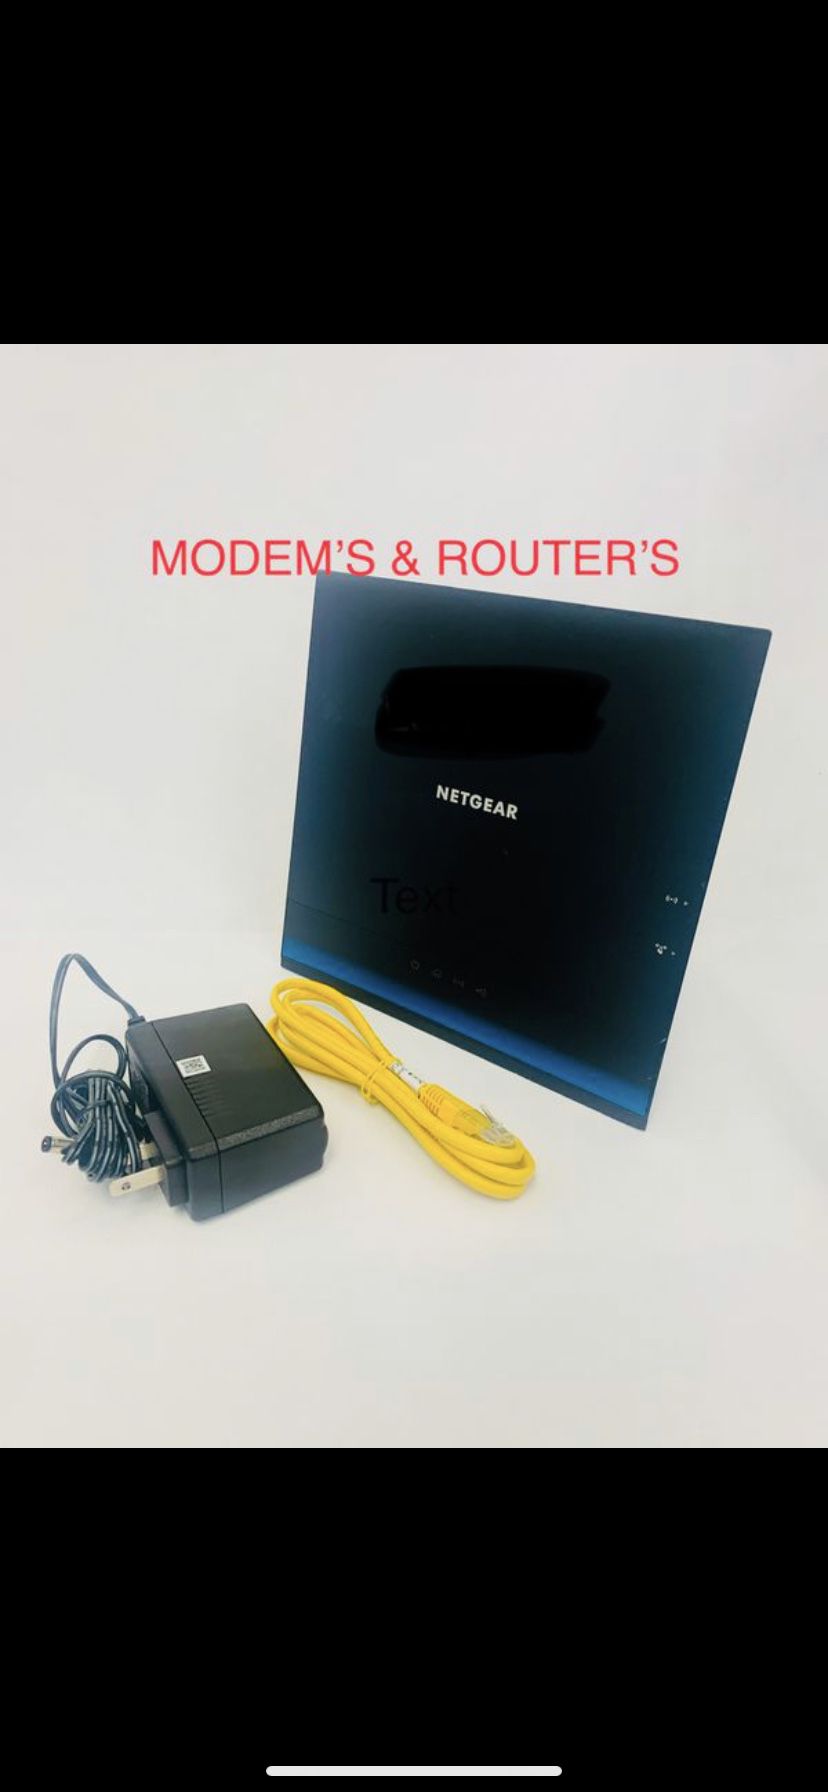 Netgear Routers R6300 and Sagemcom Fast5260